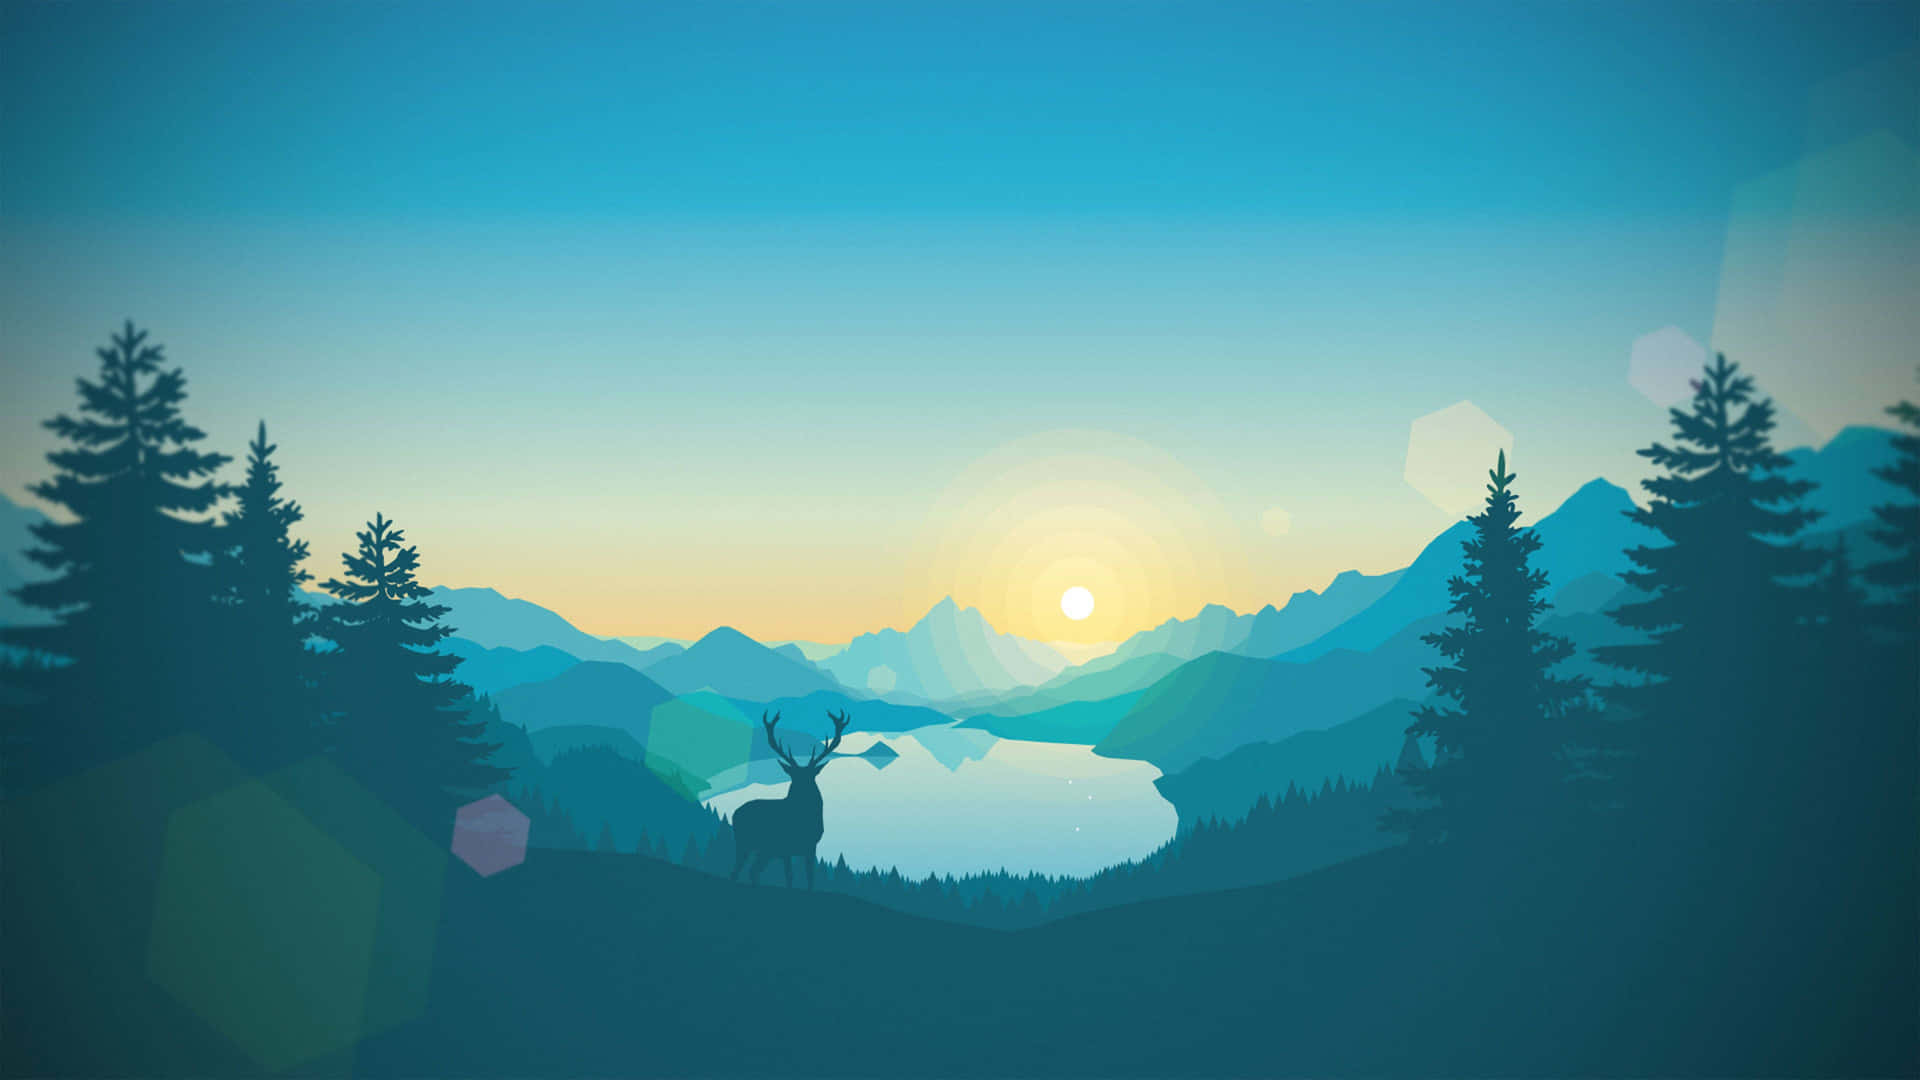 a deer in the mountains with a lake in the background Wallpaper